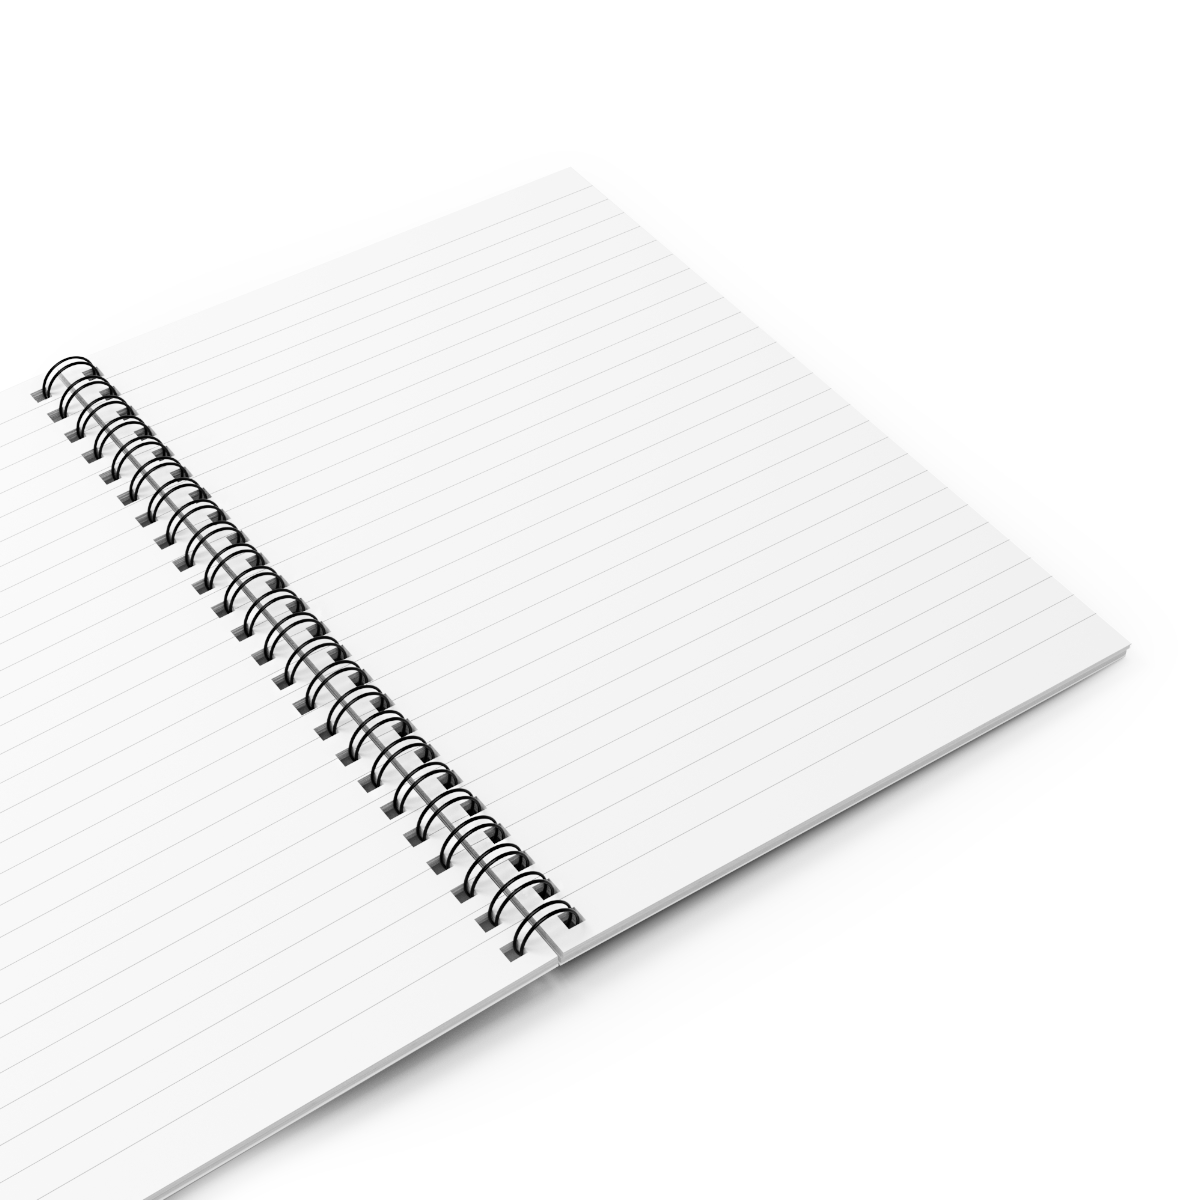 Truth Spiral Notebook - Ruled Line product thumbnail image